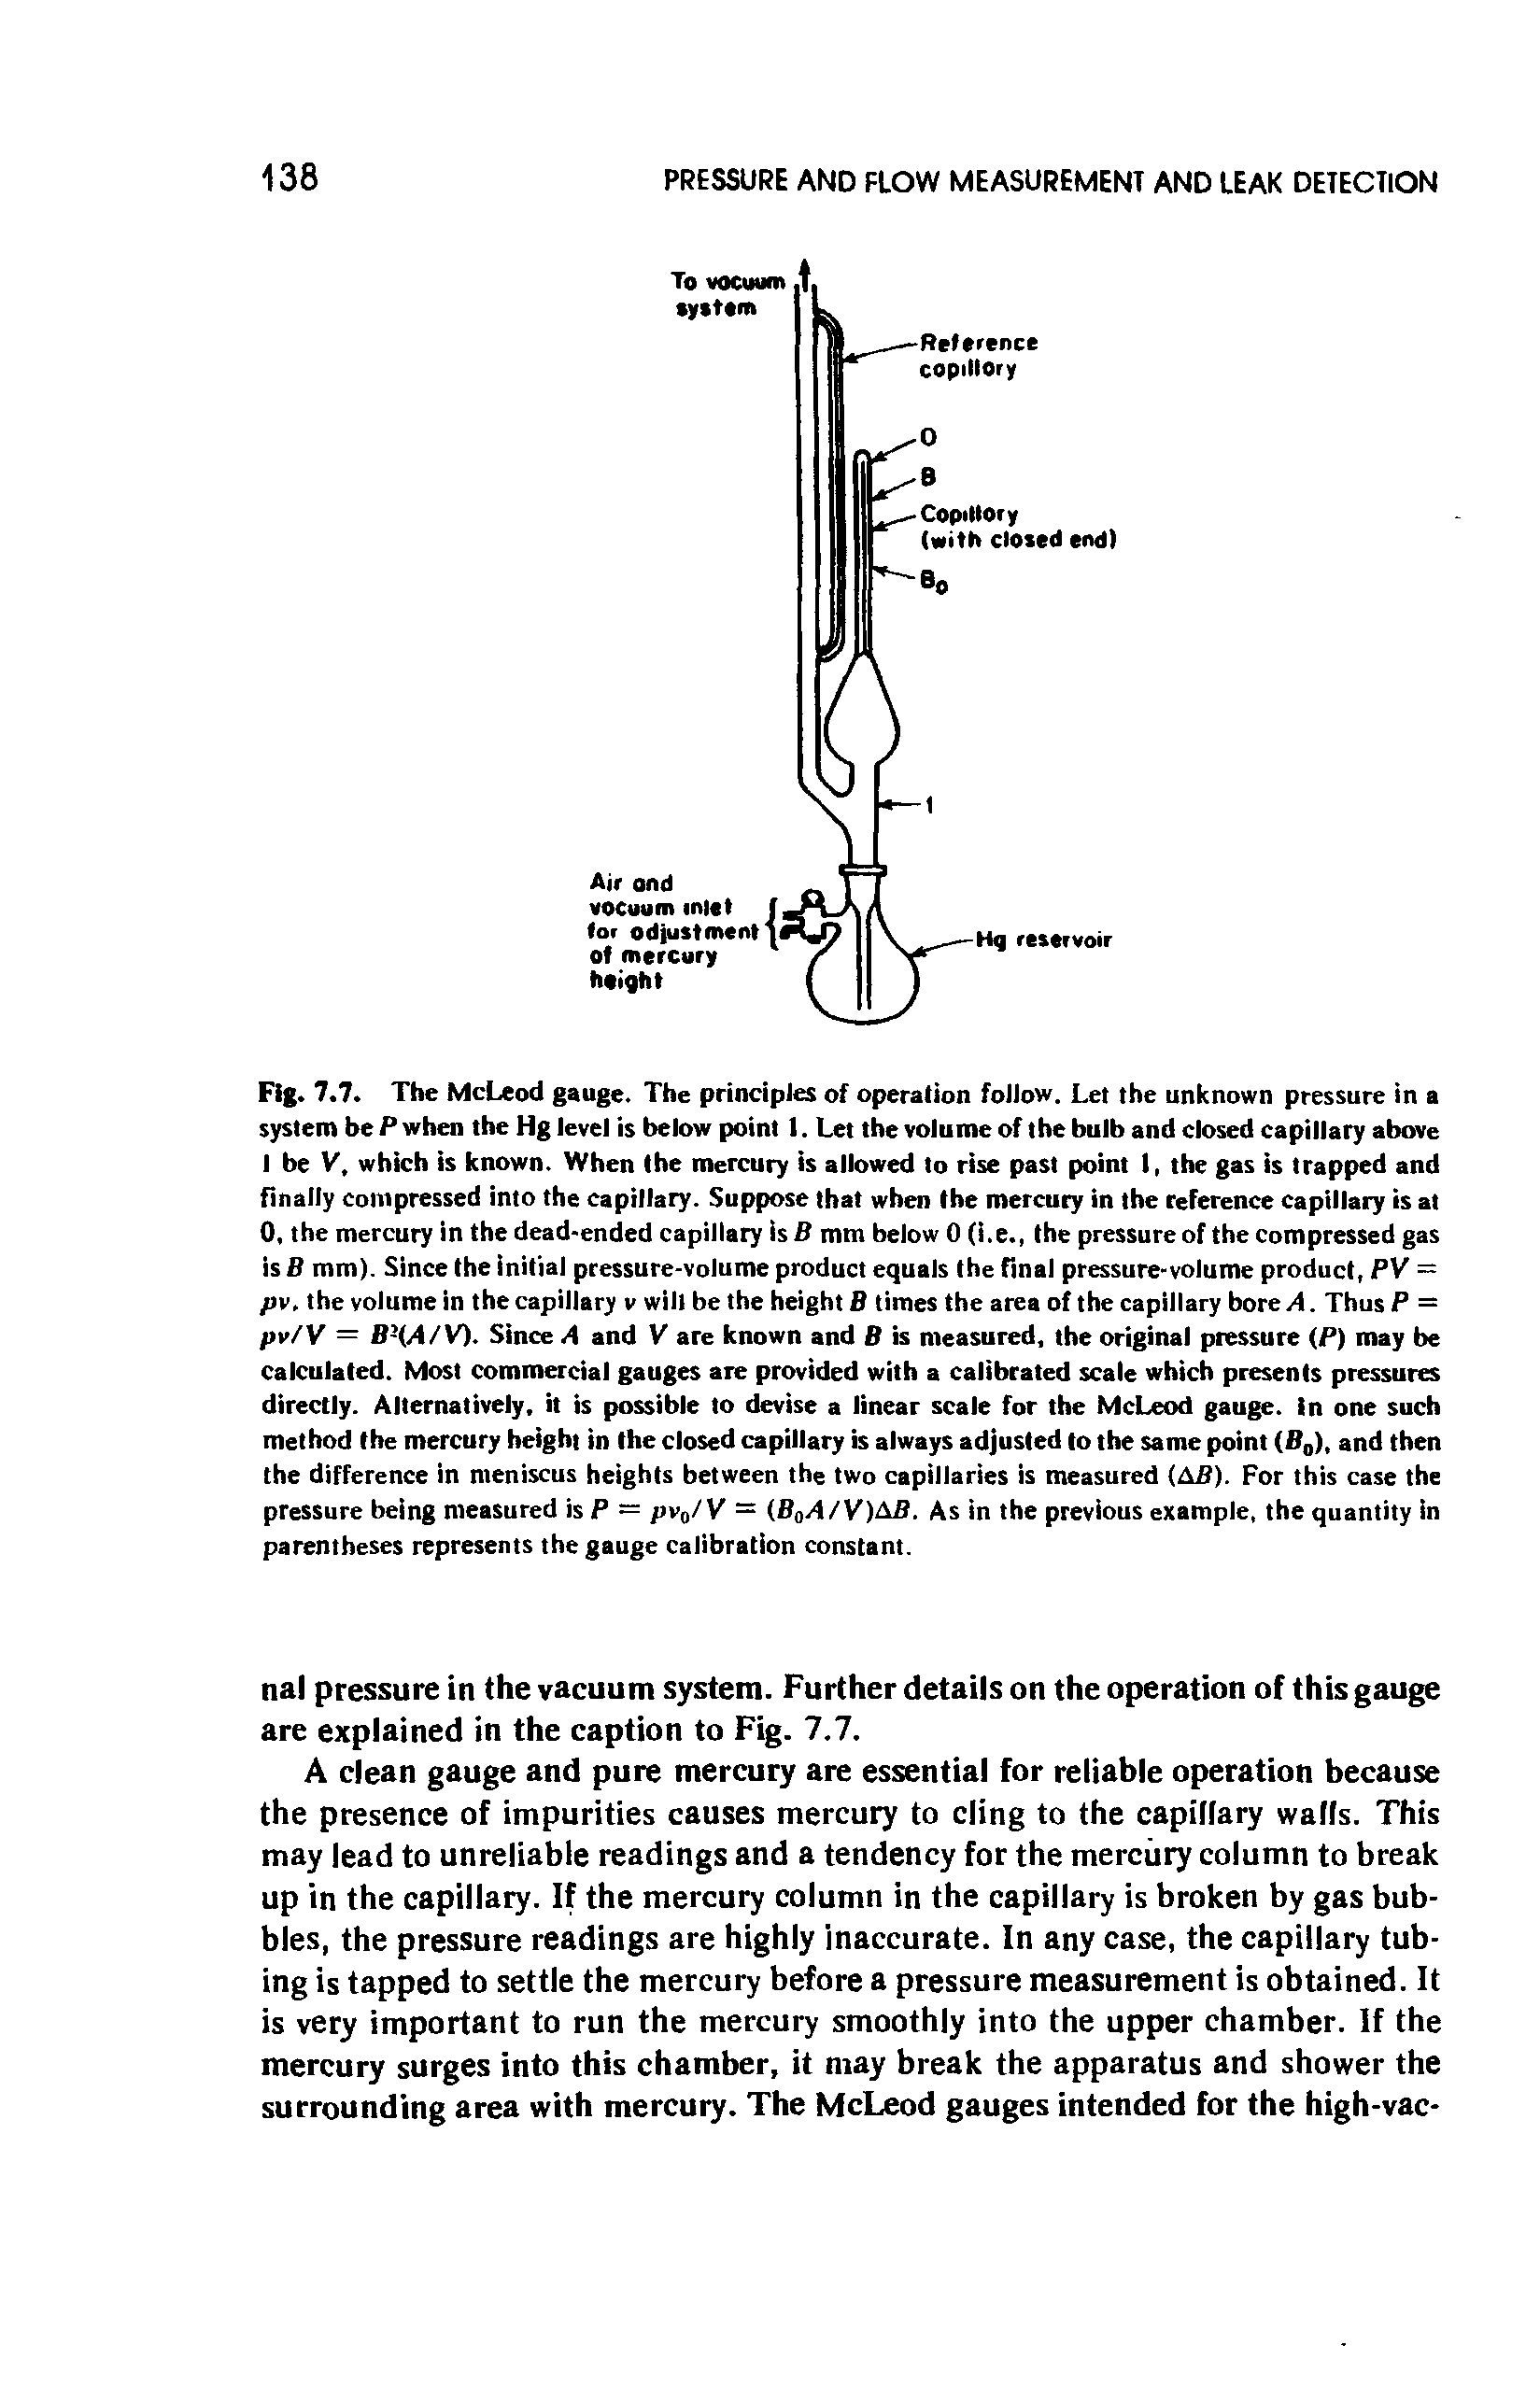 Fig. 7.7. The McLeod gauge. The principles of operation follow. Let the unknown pressure in a system be P when the Hg level is below point 1. Let the volume of the bulb and closed capillary above I be V, which is known. When the mercury is allowed to rise past point I, the gas is trapped and finally compressed into the capillary. Suppose that when the mercury in the reference capillary is at 0, the mercury in the dead-ended capillary is B mm below 0 (i.e., the pressure of the compressed gas is B mm). Since the initial pressure-volume product equals the final pressure-volume product, PV = pv, the volume in thecapillary v will be the height B times the area of the capillary bore A. Thus P = pv/V = B (A/V). Since A and V are known and B is measured, the original pressure (P) may be calculated. Most commercial gauges are provided with a calibrated scale which presents pressures directly. Alternatively, it is possible to devise a linear scale for the McLeod gauge, in one such method the mercury height in the closed capillary is always adjusted to the same point (B0), and then the difference in meniscus heights between the two capillaries is measured (AB). For this case the pressure being measured is P = pv0/V = (B0A/V)AB. As in the previous example, the quantity in parentheses represents the gauge calibration constant.